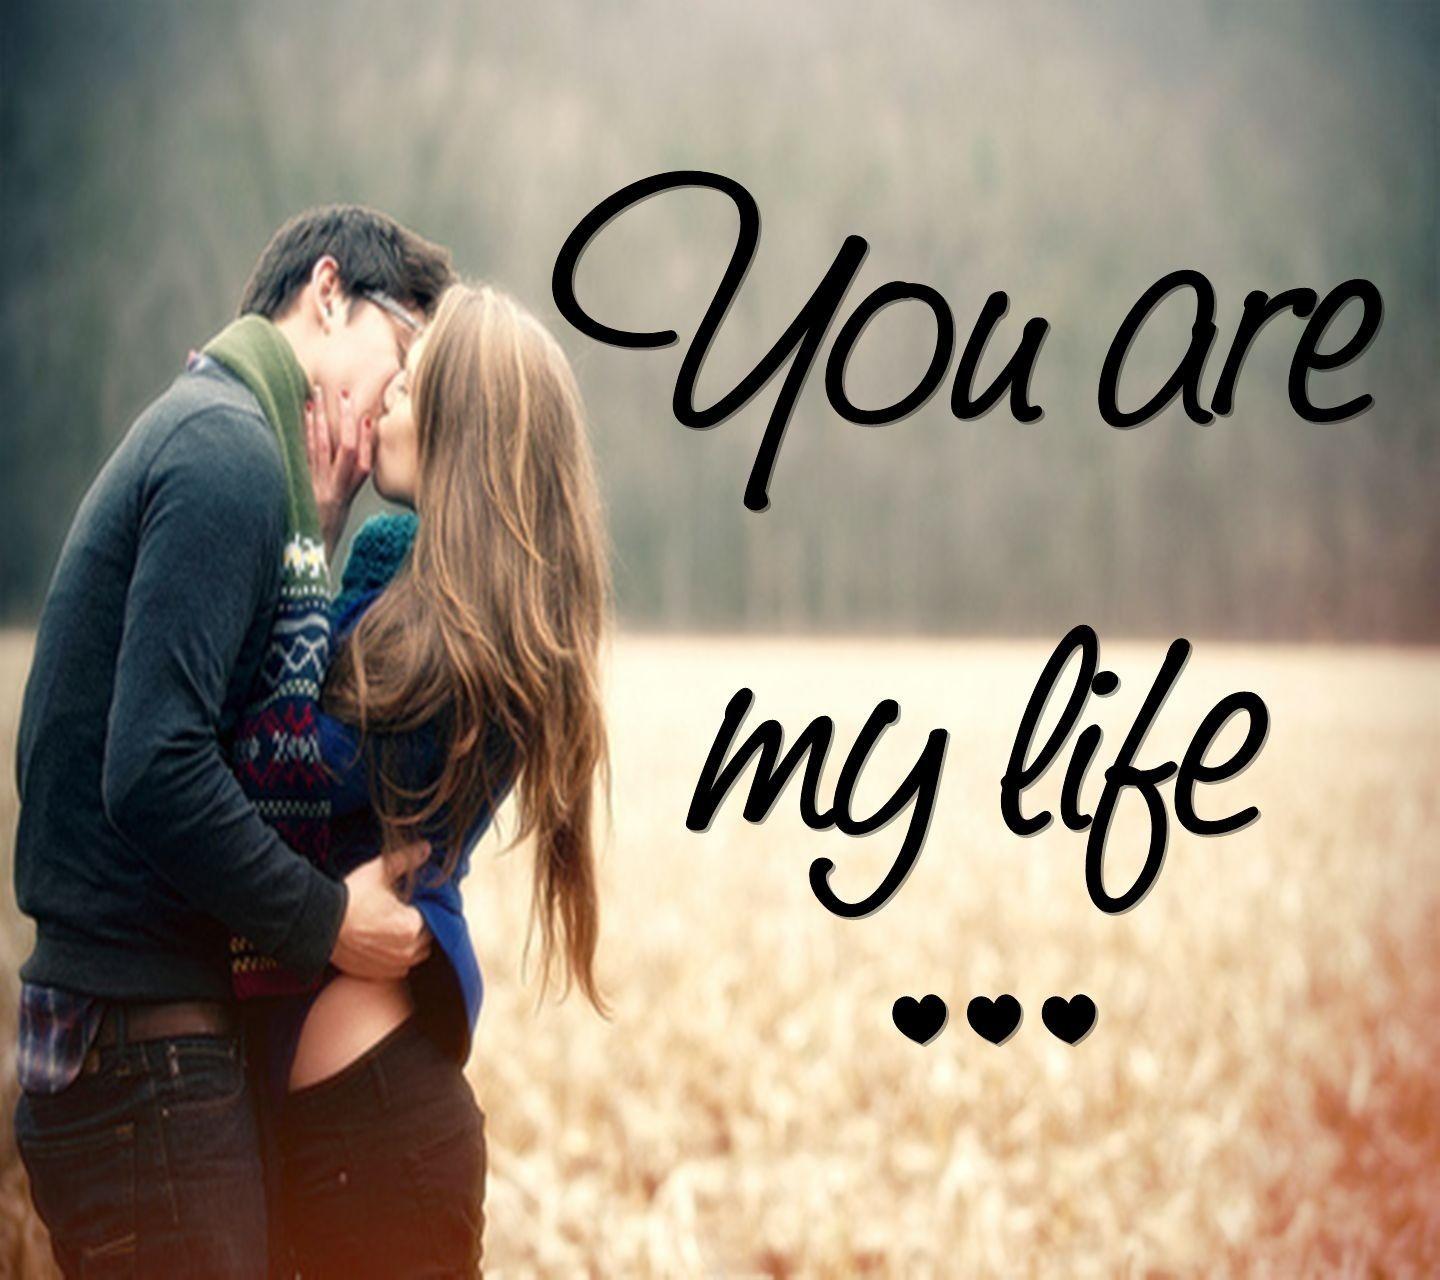 Romantic Wallpapers Of Couples With Quotes - Wallpaper Cave